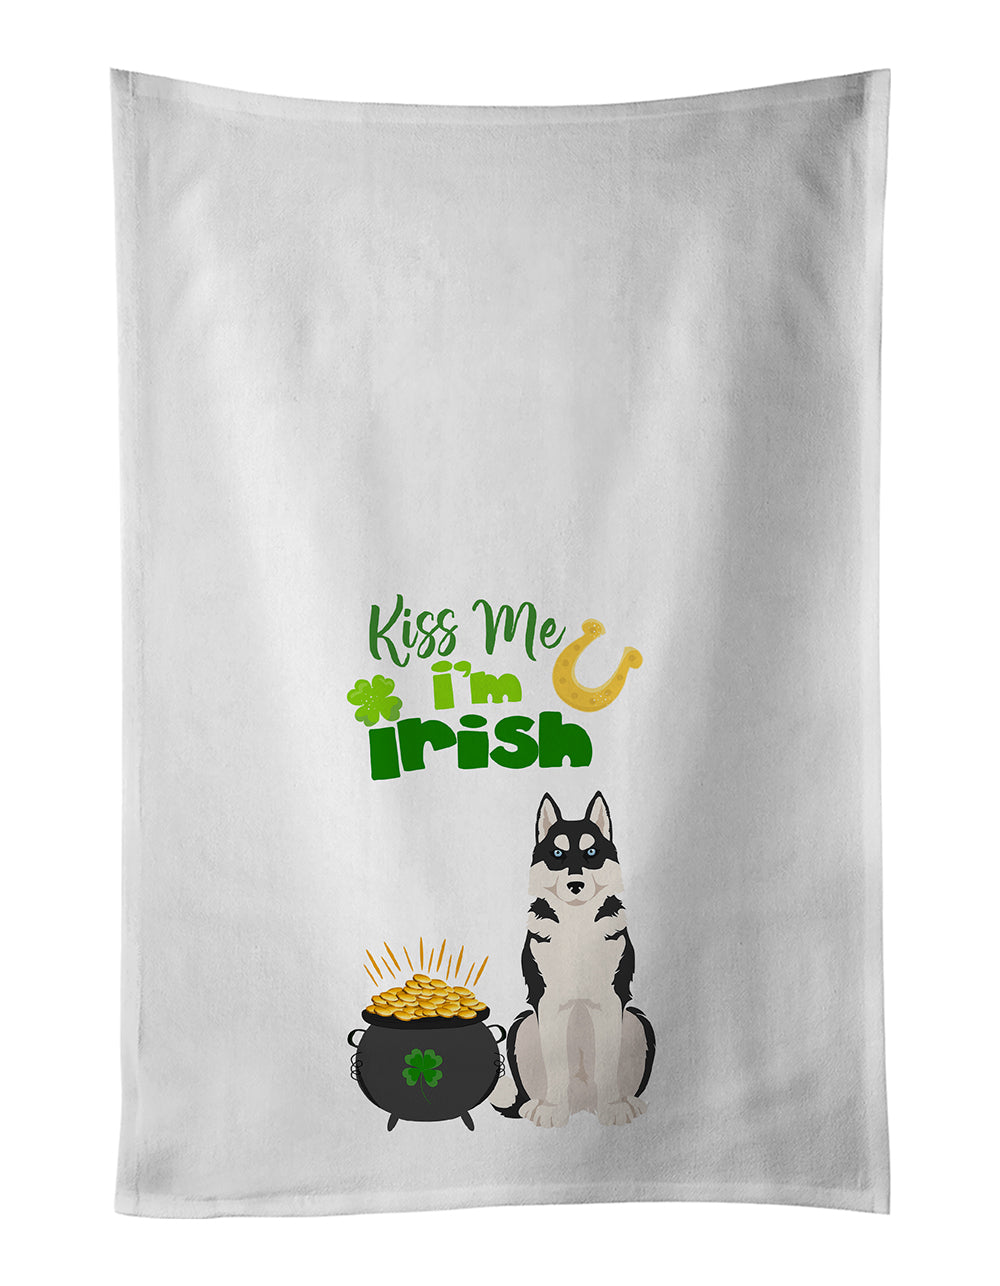 Buy this Black Siberian Husky St. Patrick's Day White Kitchen Towel Set of 2 Dish Towels